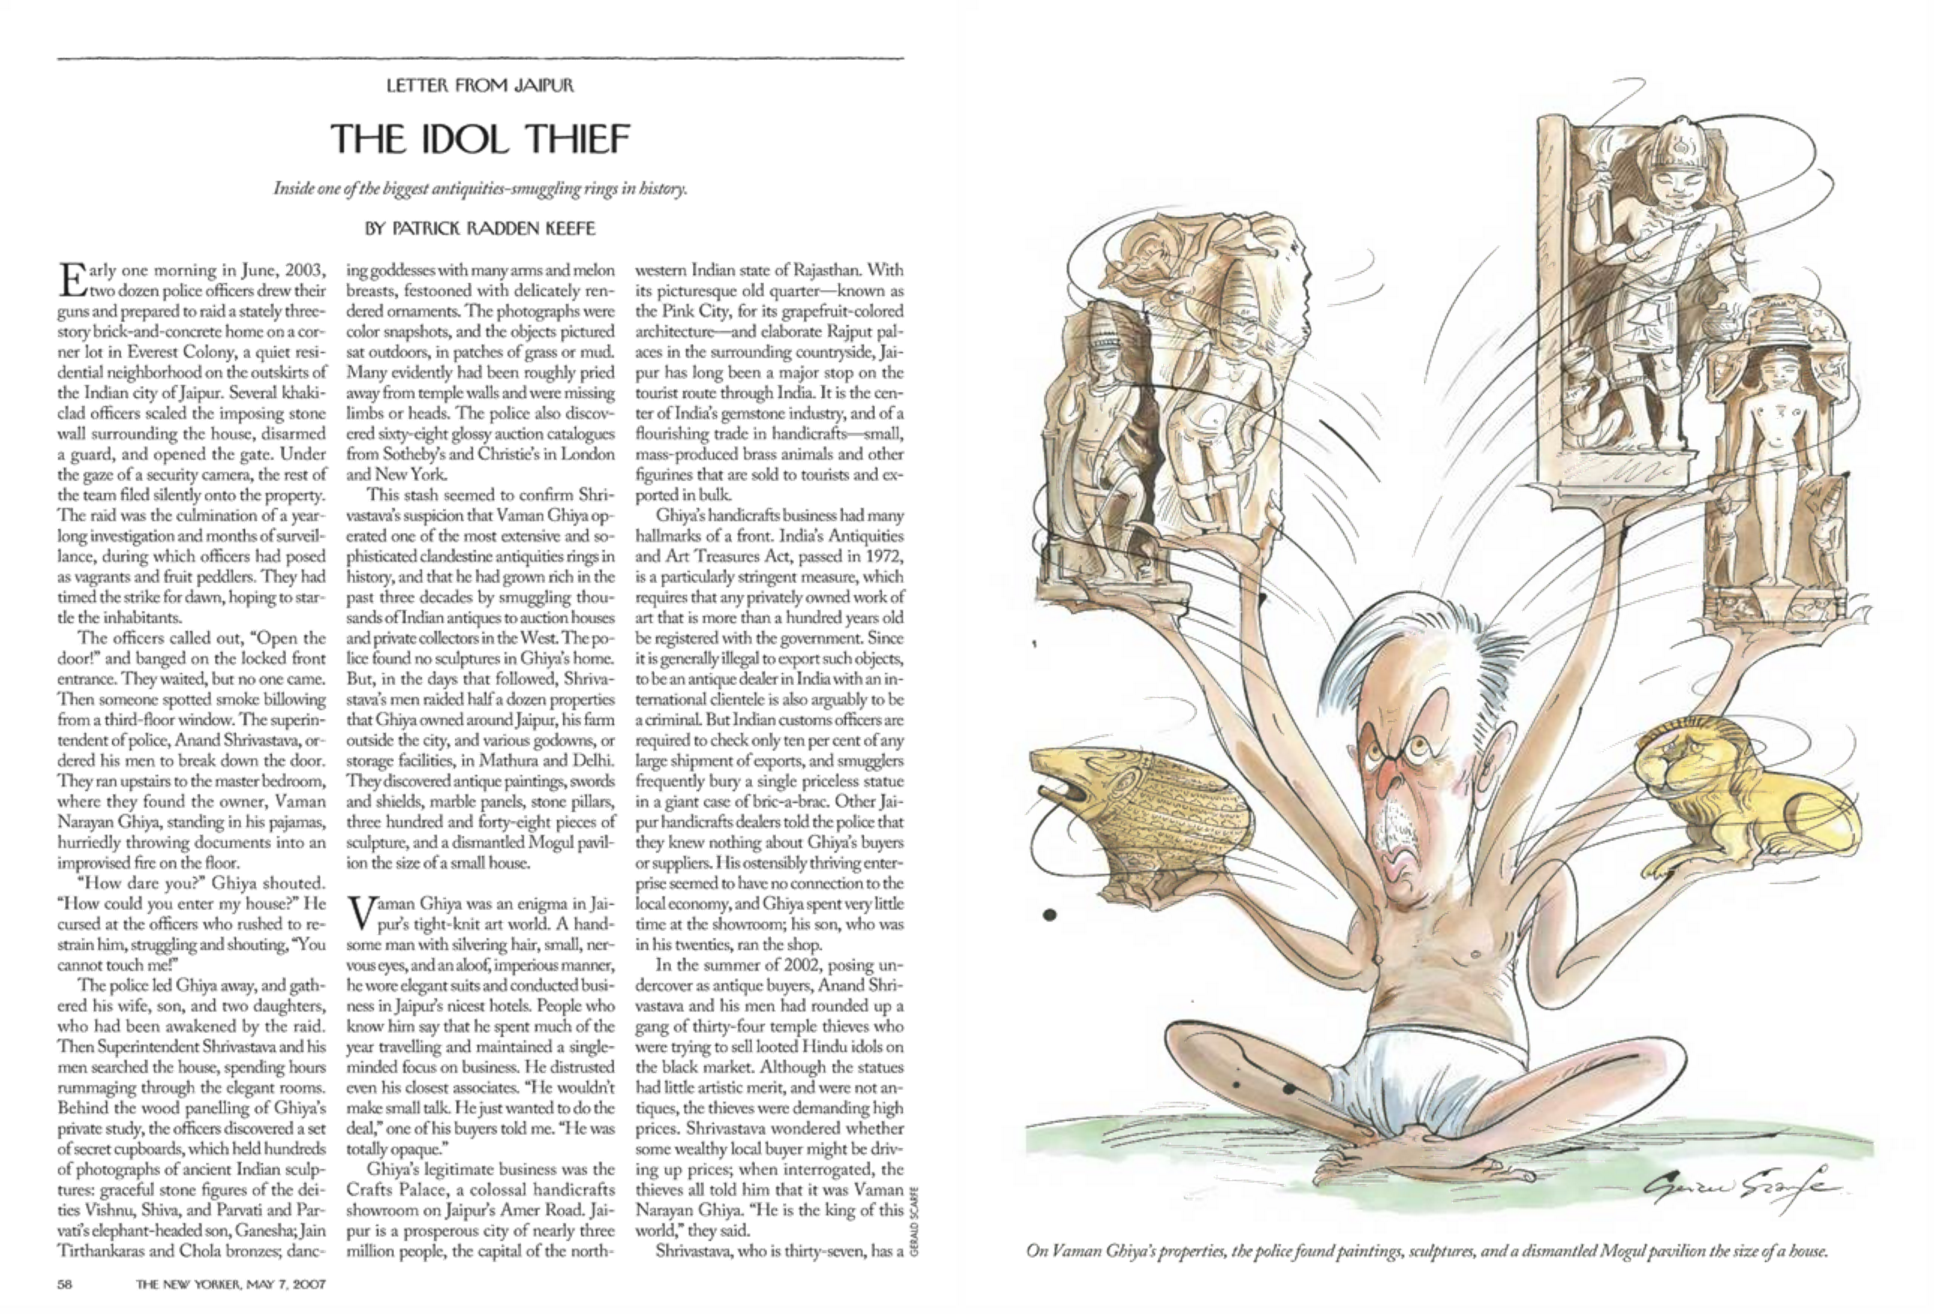 "The Idol Thief," The New Yorker, May 7, 2007